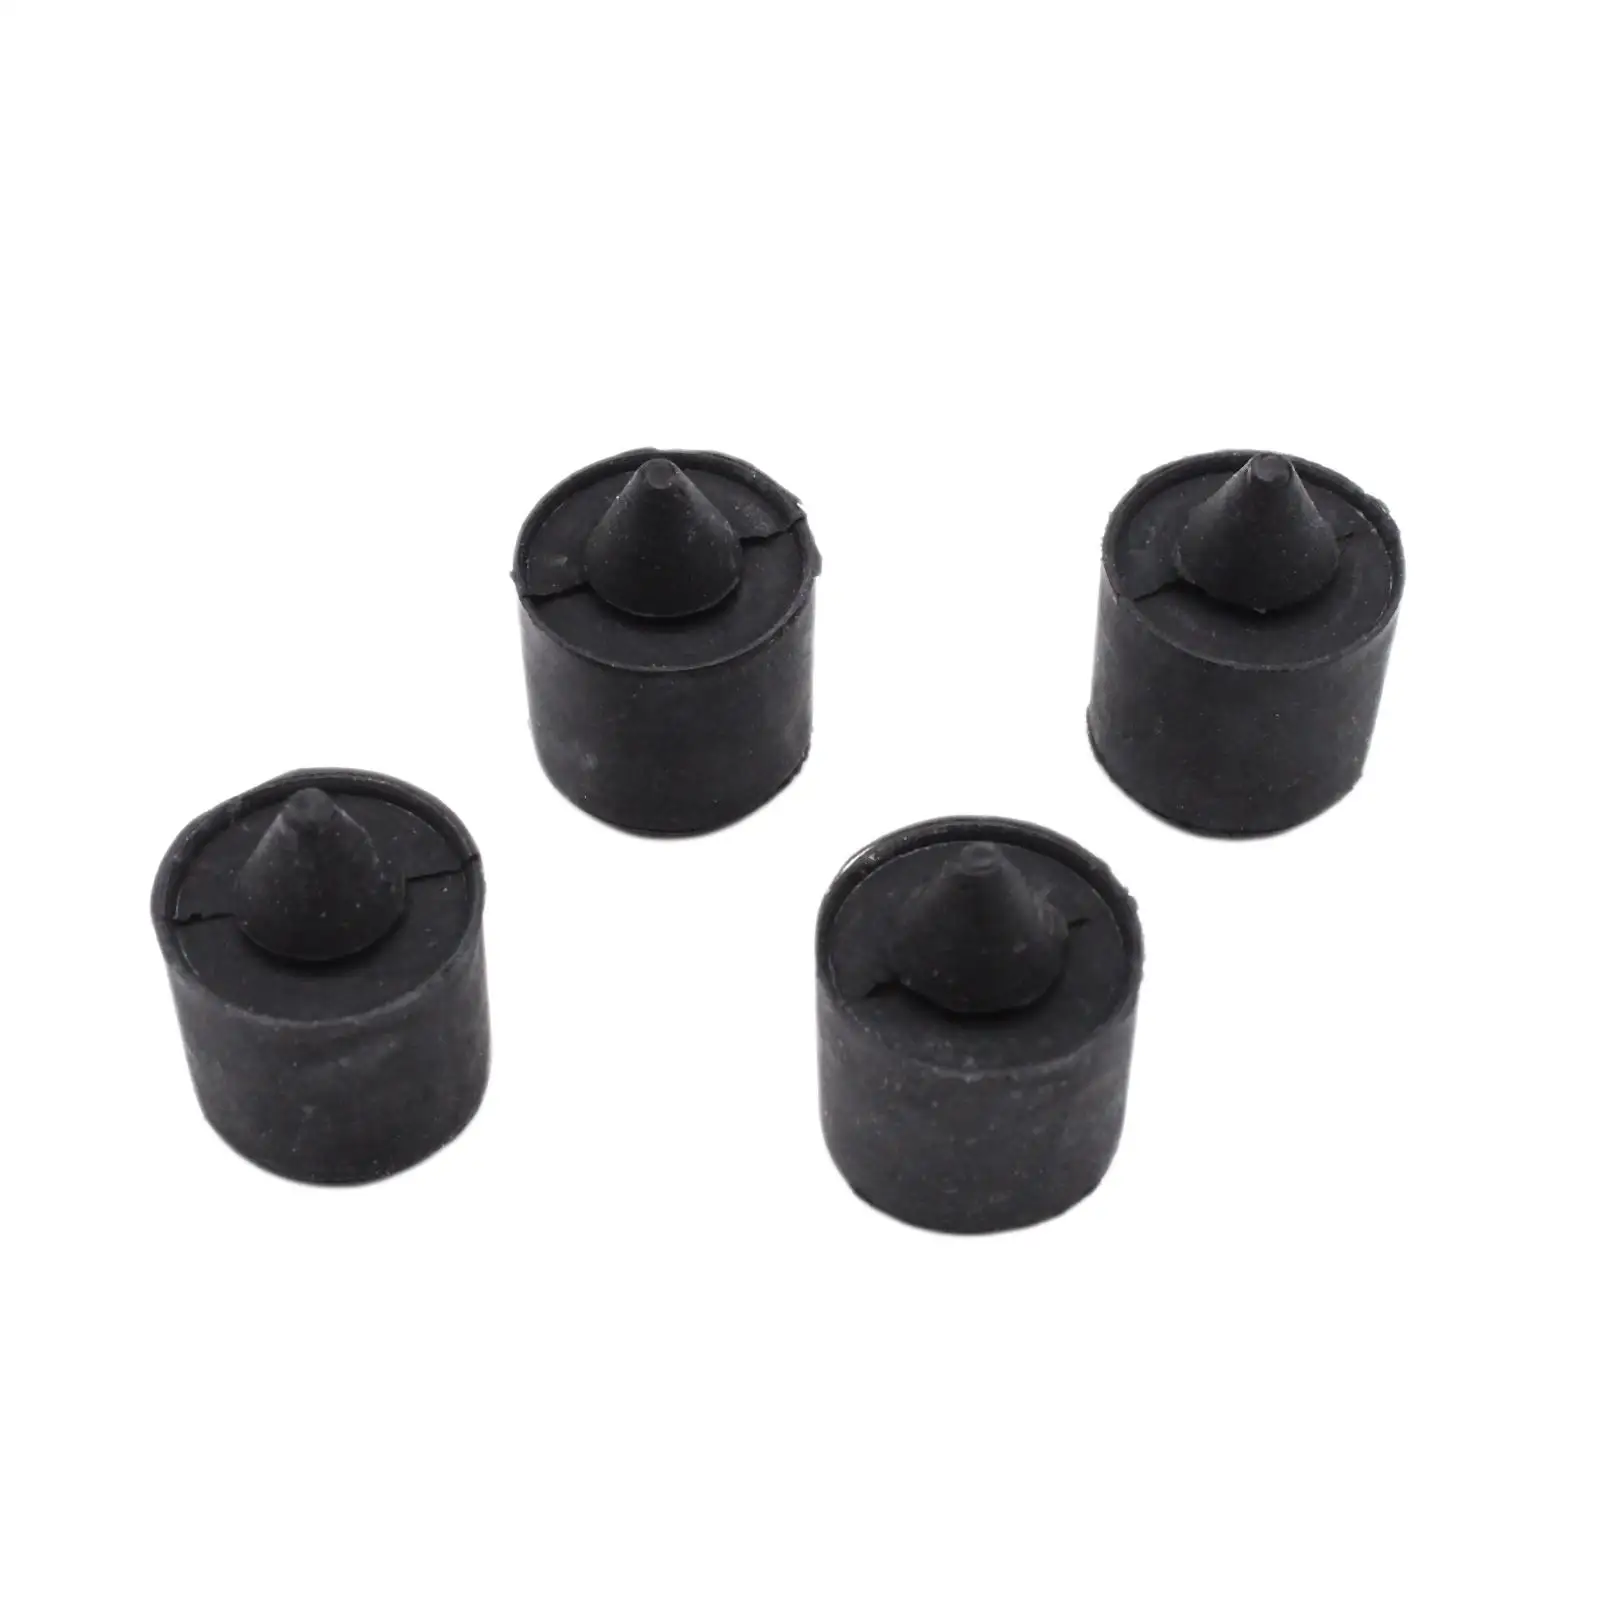 4x Vehicle 16.5mm Exterior Rubber Bumpers W705903-S300 Black for Ford Replace Parts